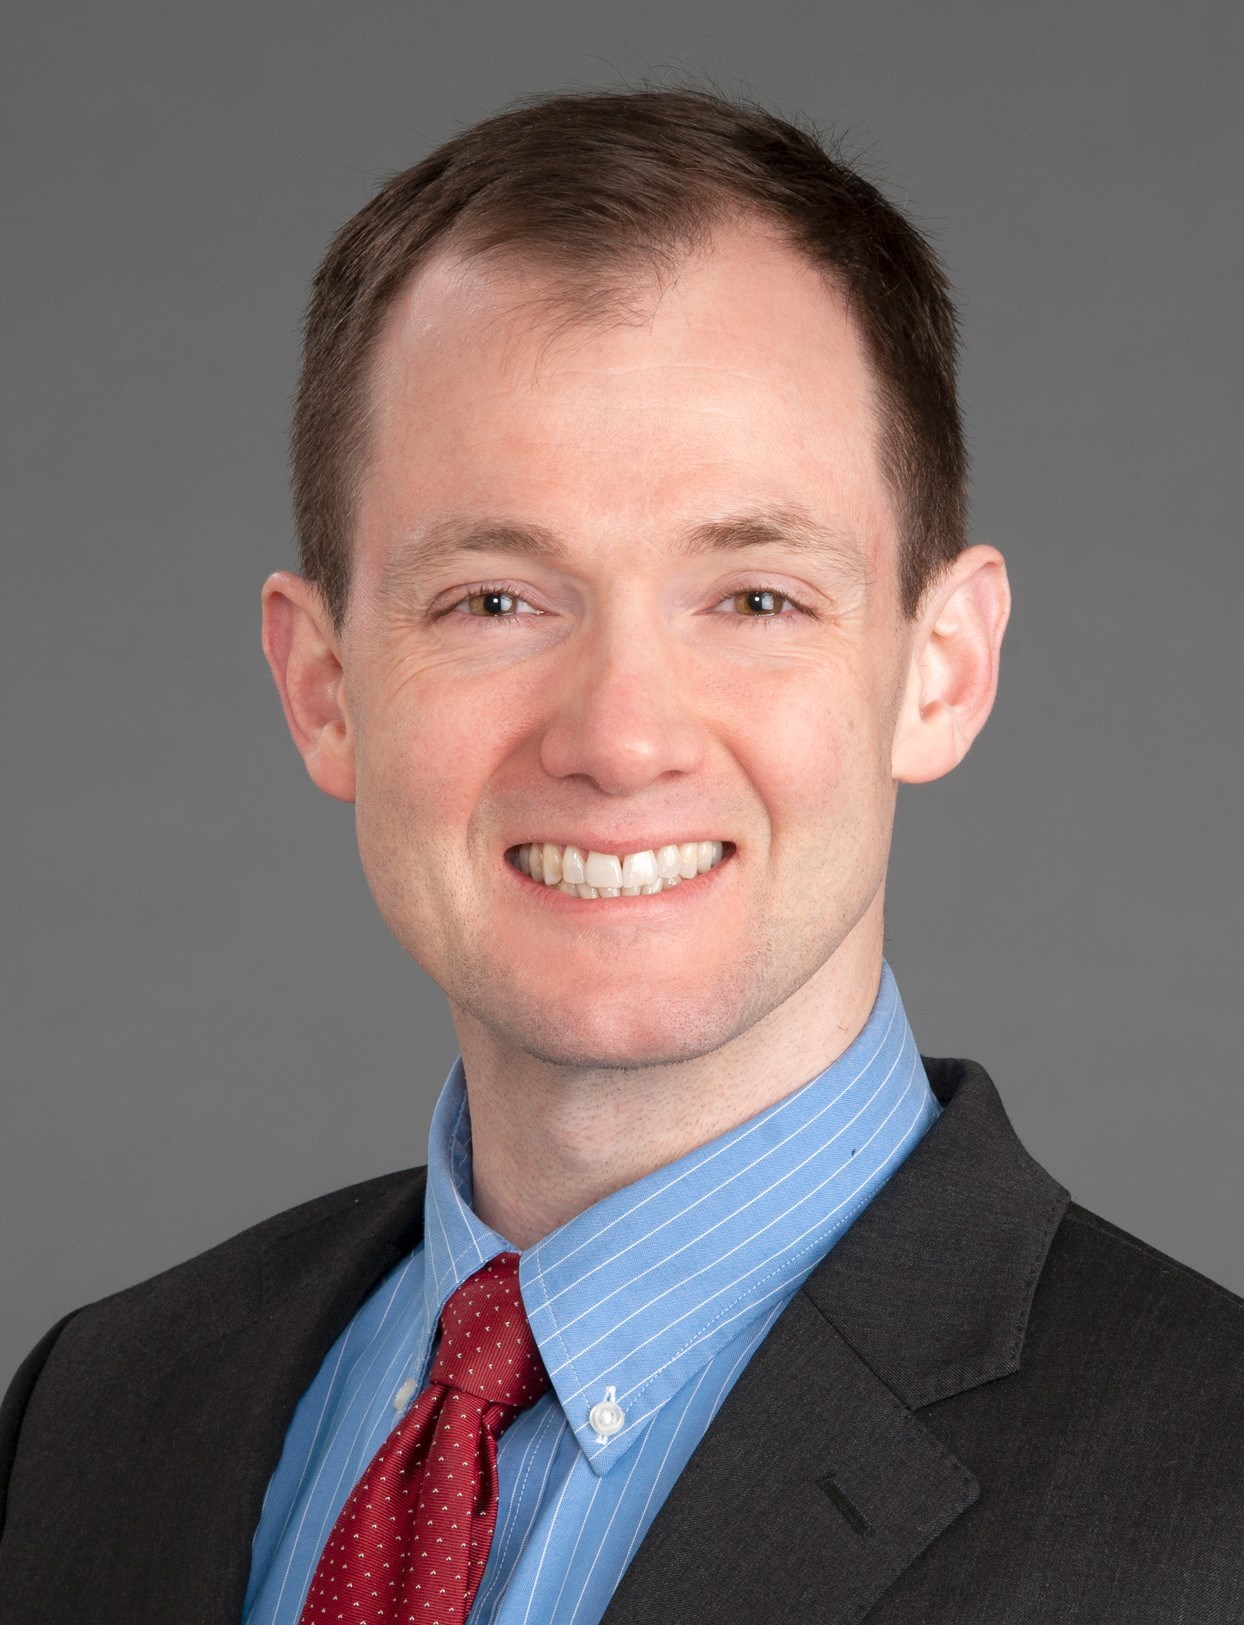 Dr. Matthew Singleton will discuss the diagnosis and treatment of abnormal heart rhythm at the Diehl Lectureship.